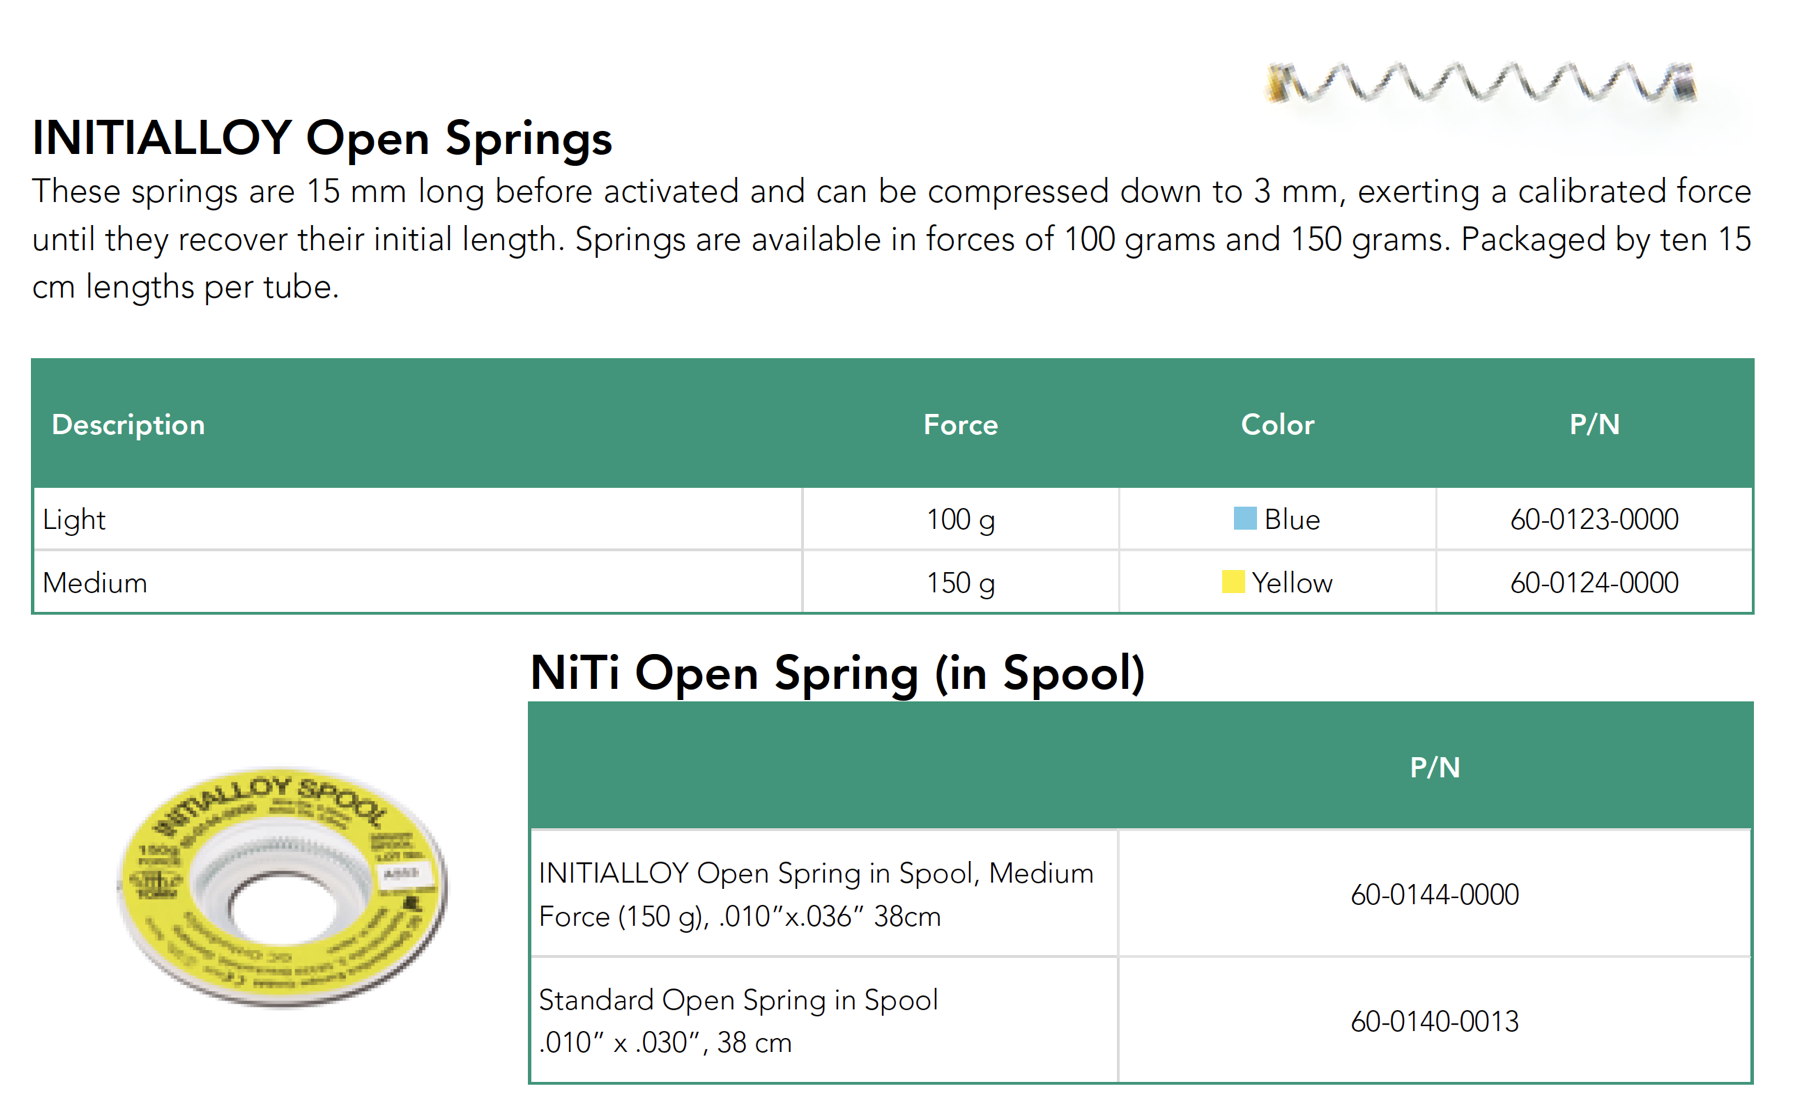 Initialloy Open Springs